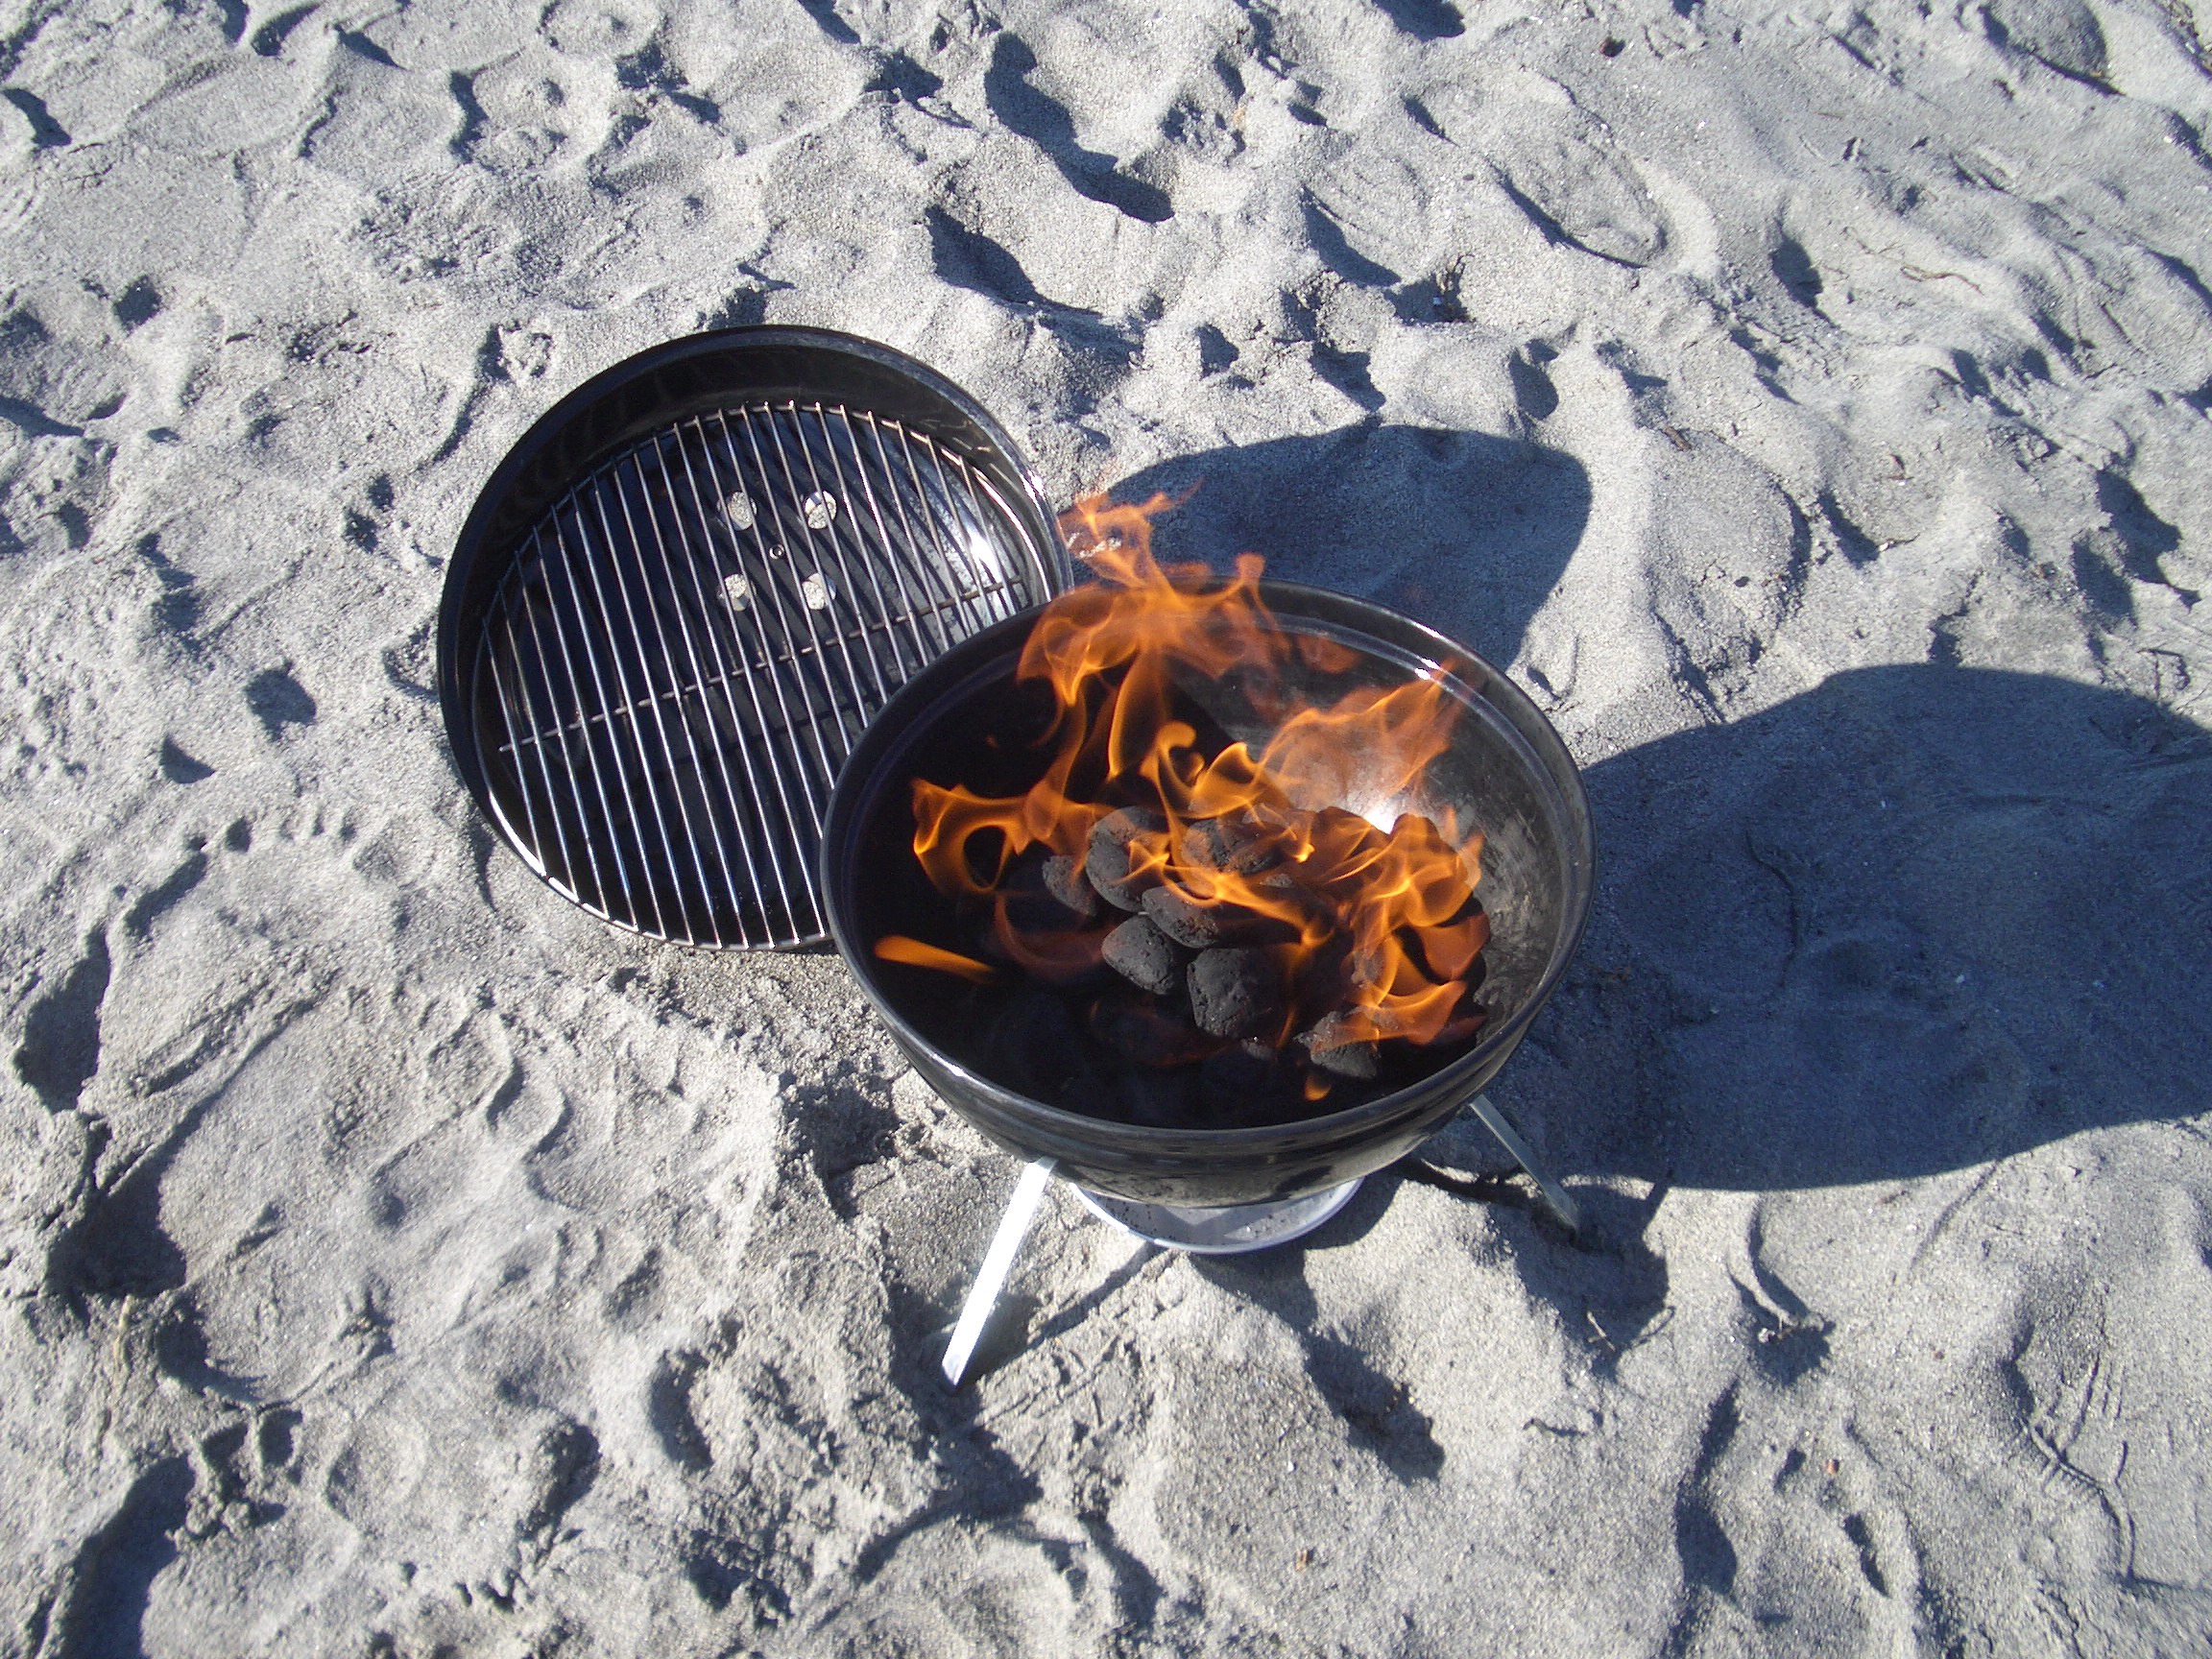 Grilling on the Beach in February